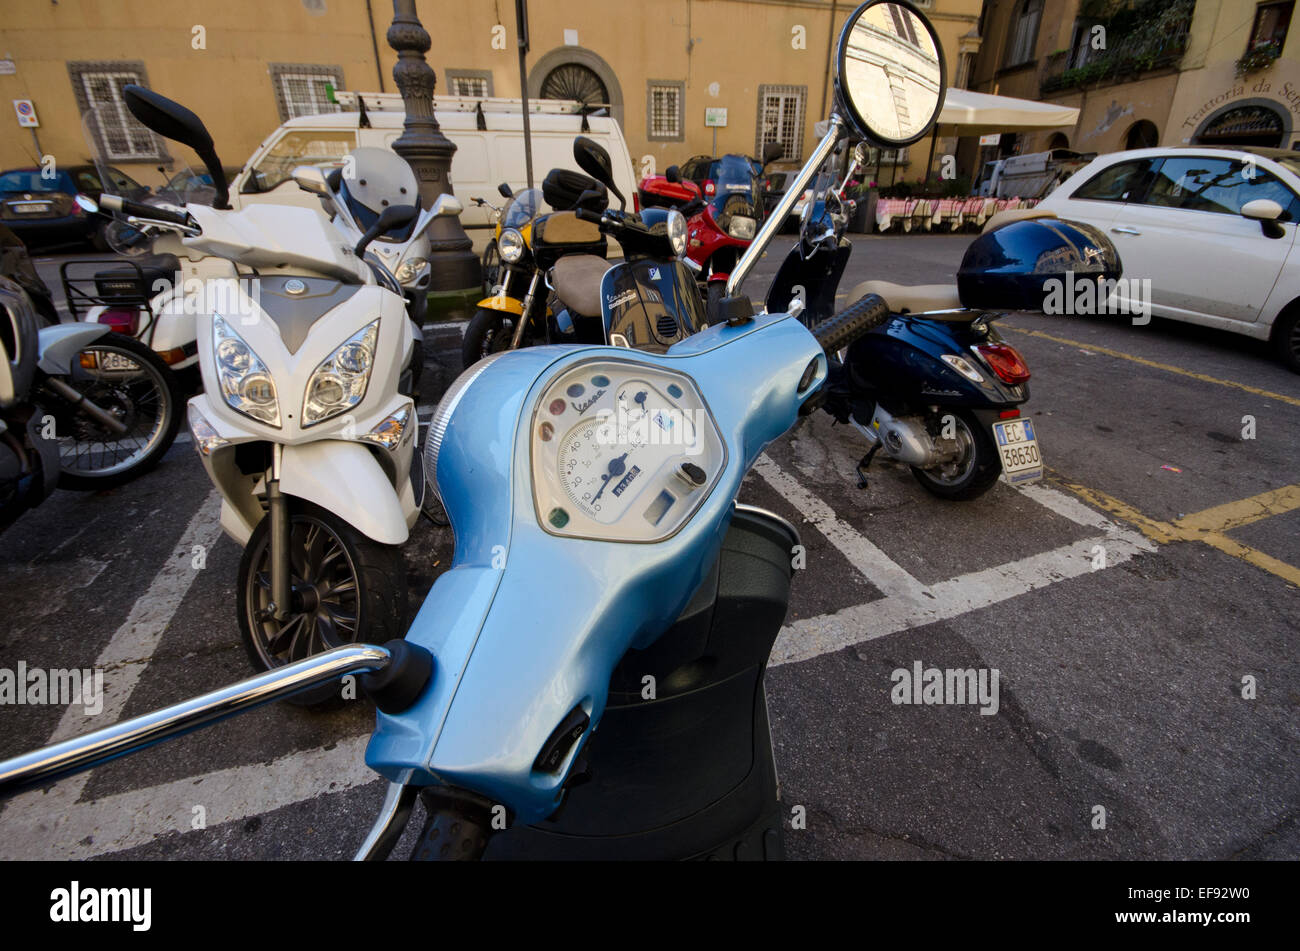 View of scooters and motorbikes in Lucca, Tuscany, Italy Stock Photo